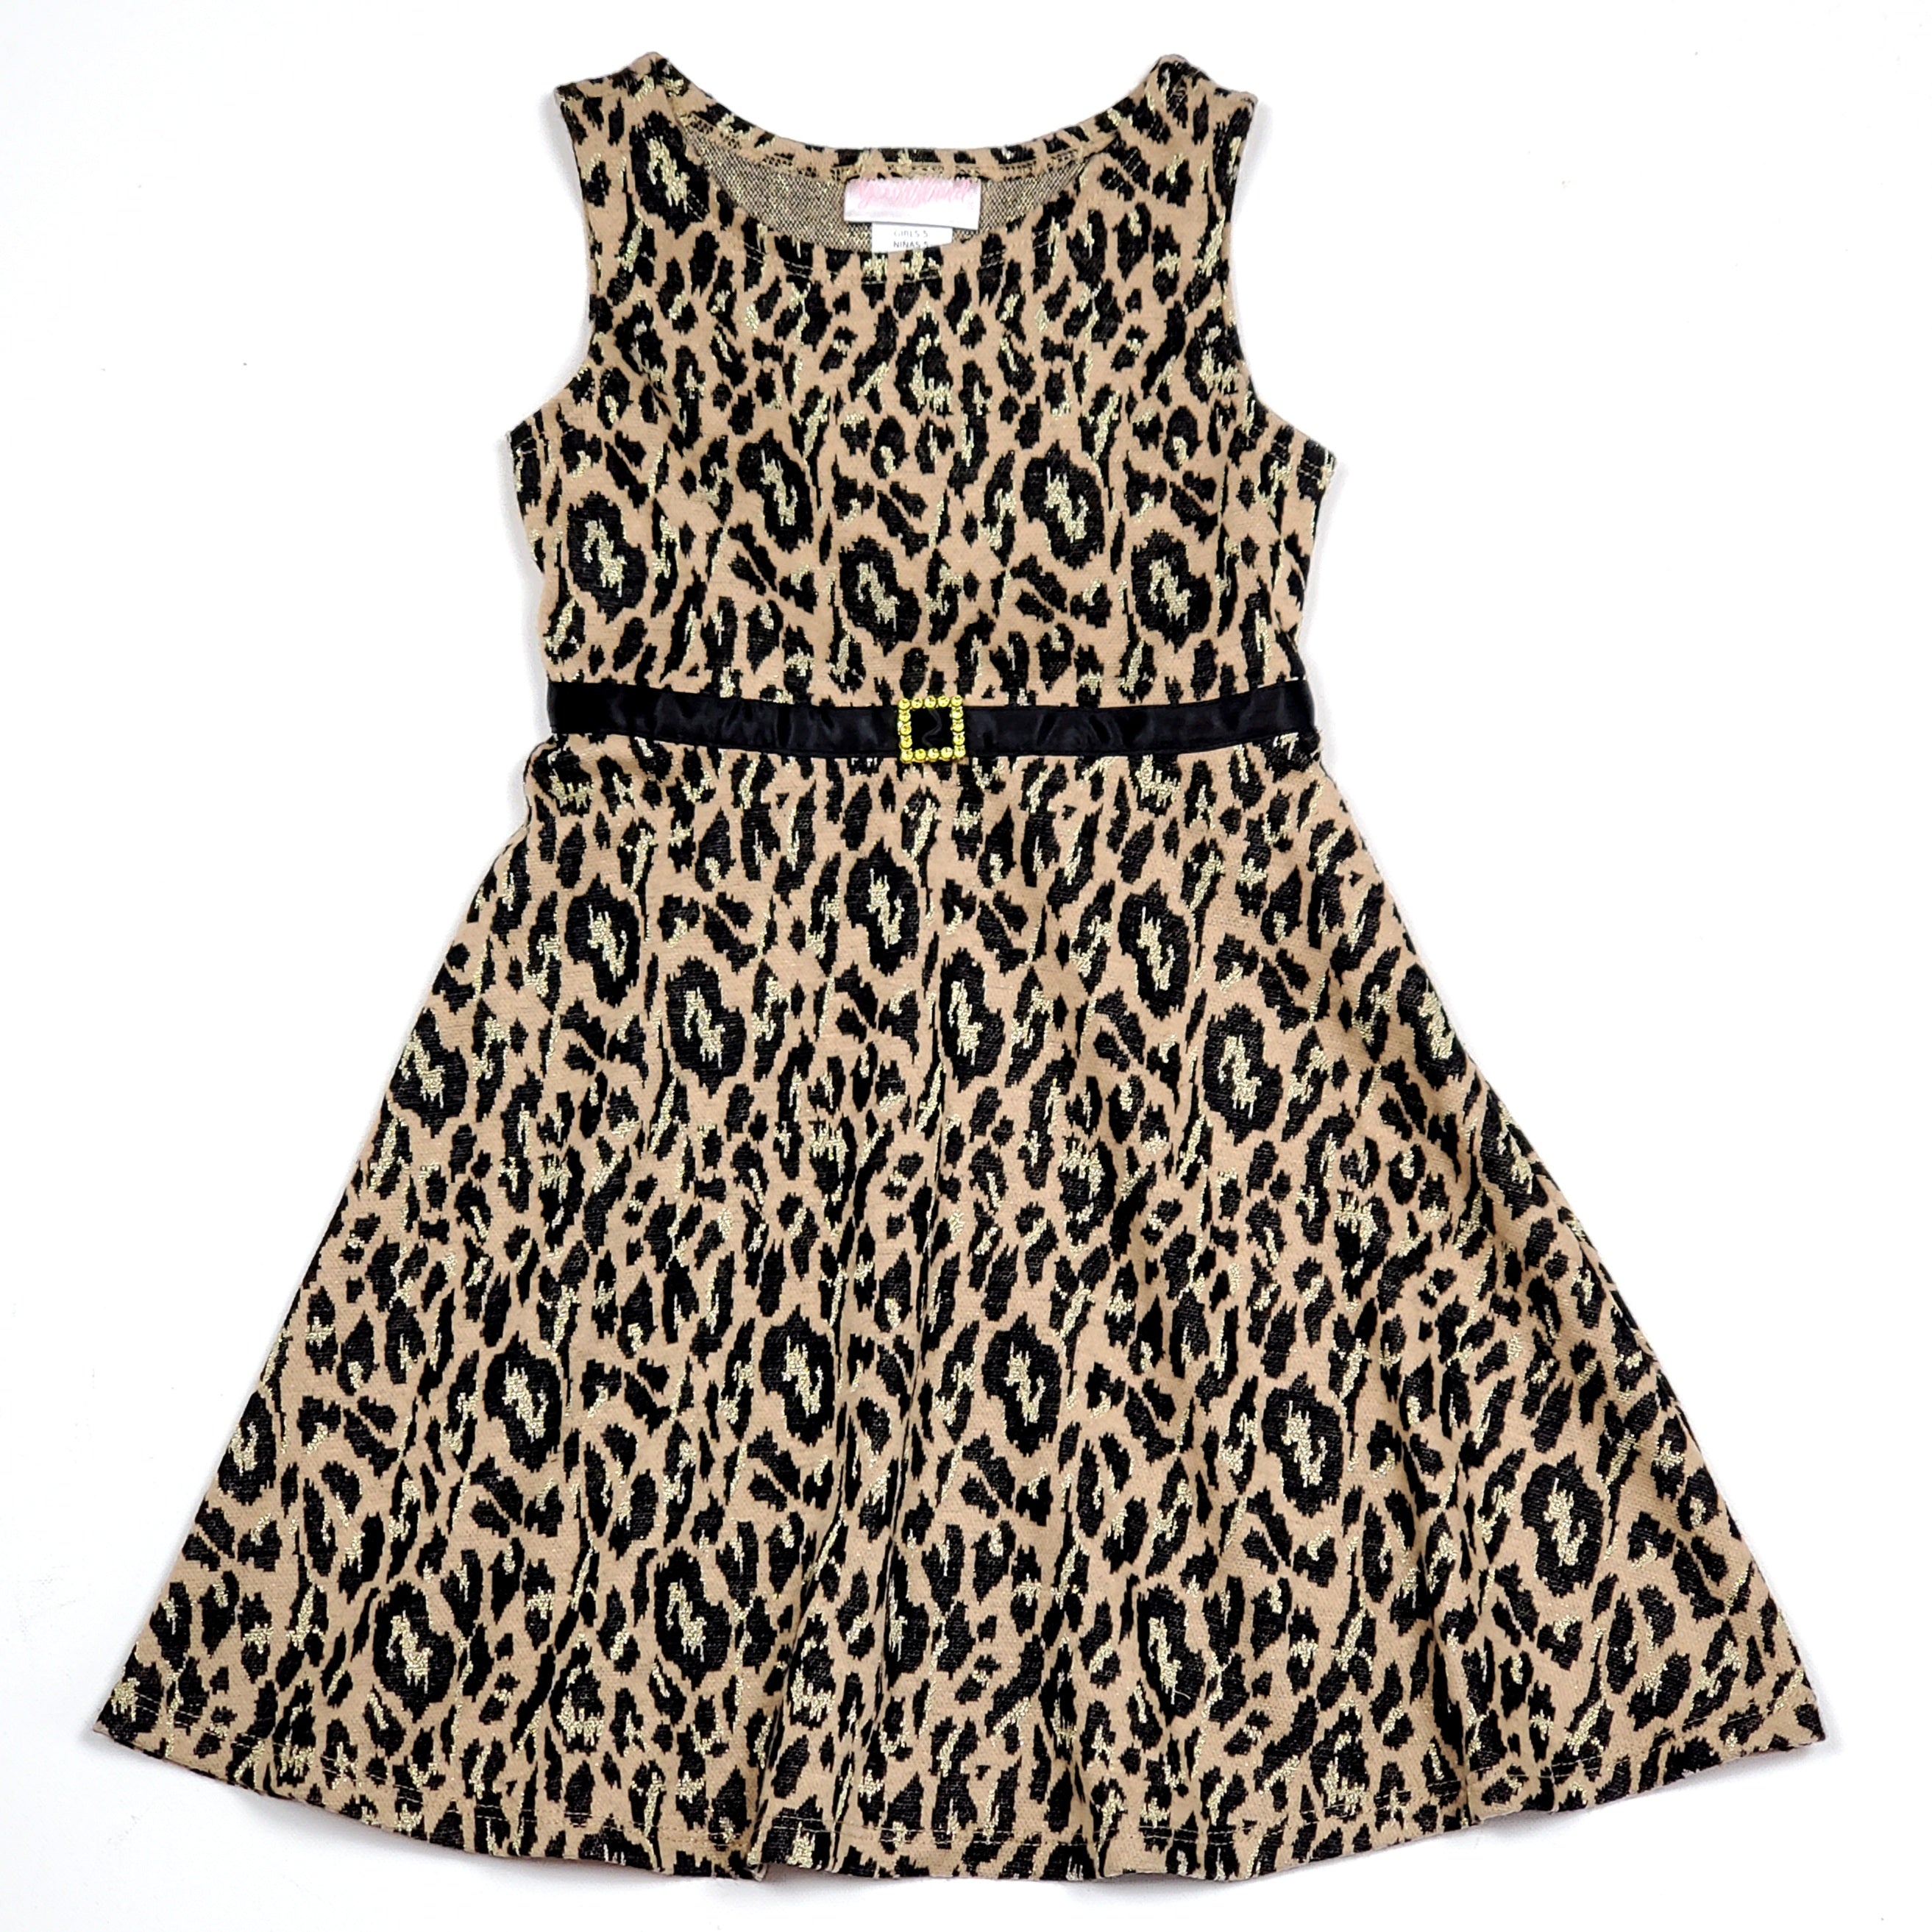 Girls Frocks & Dresses Size 4-5 Year, 5-6 Years, 6-7 Years, 7-8